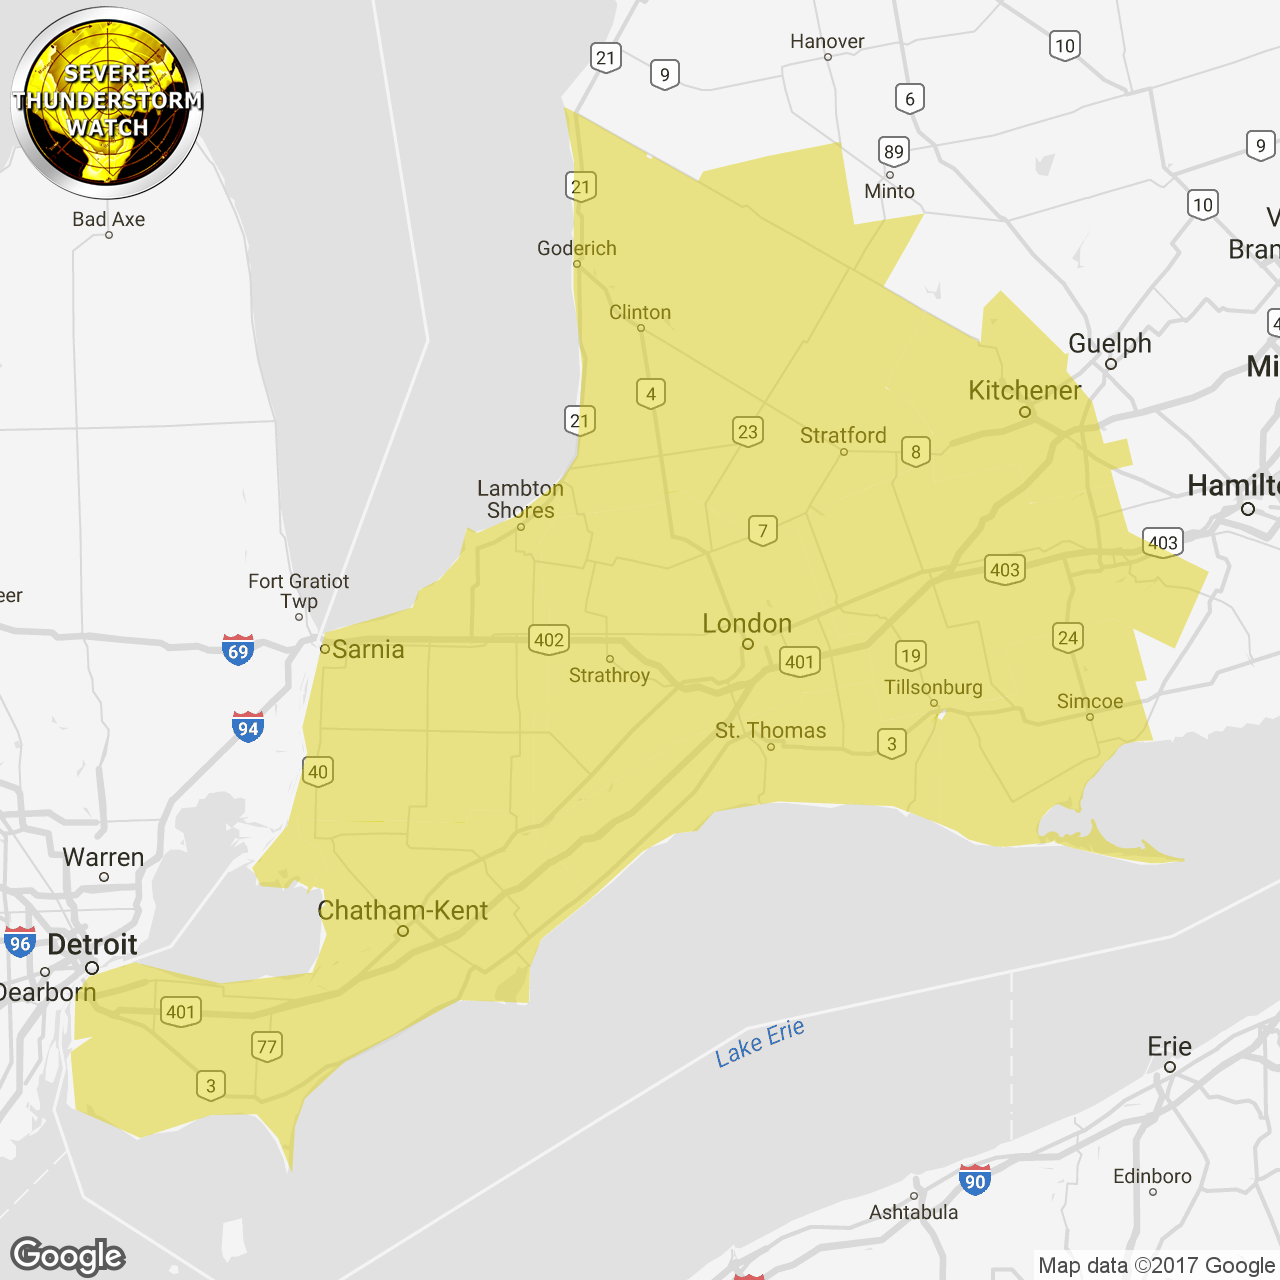 download severe thunderstorm watch